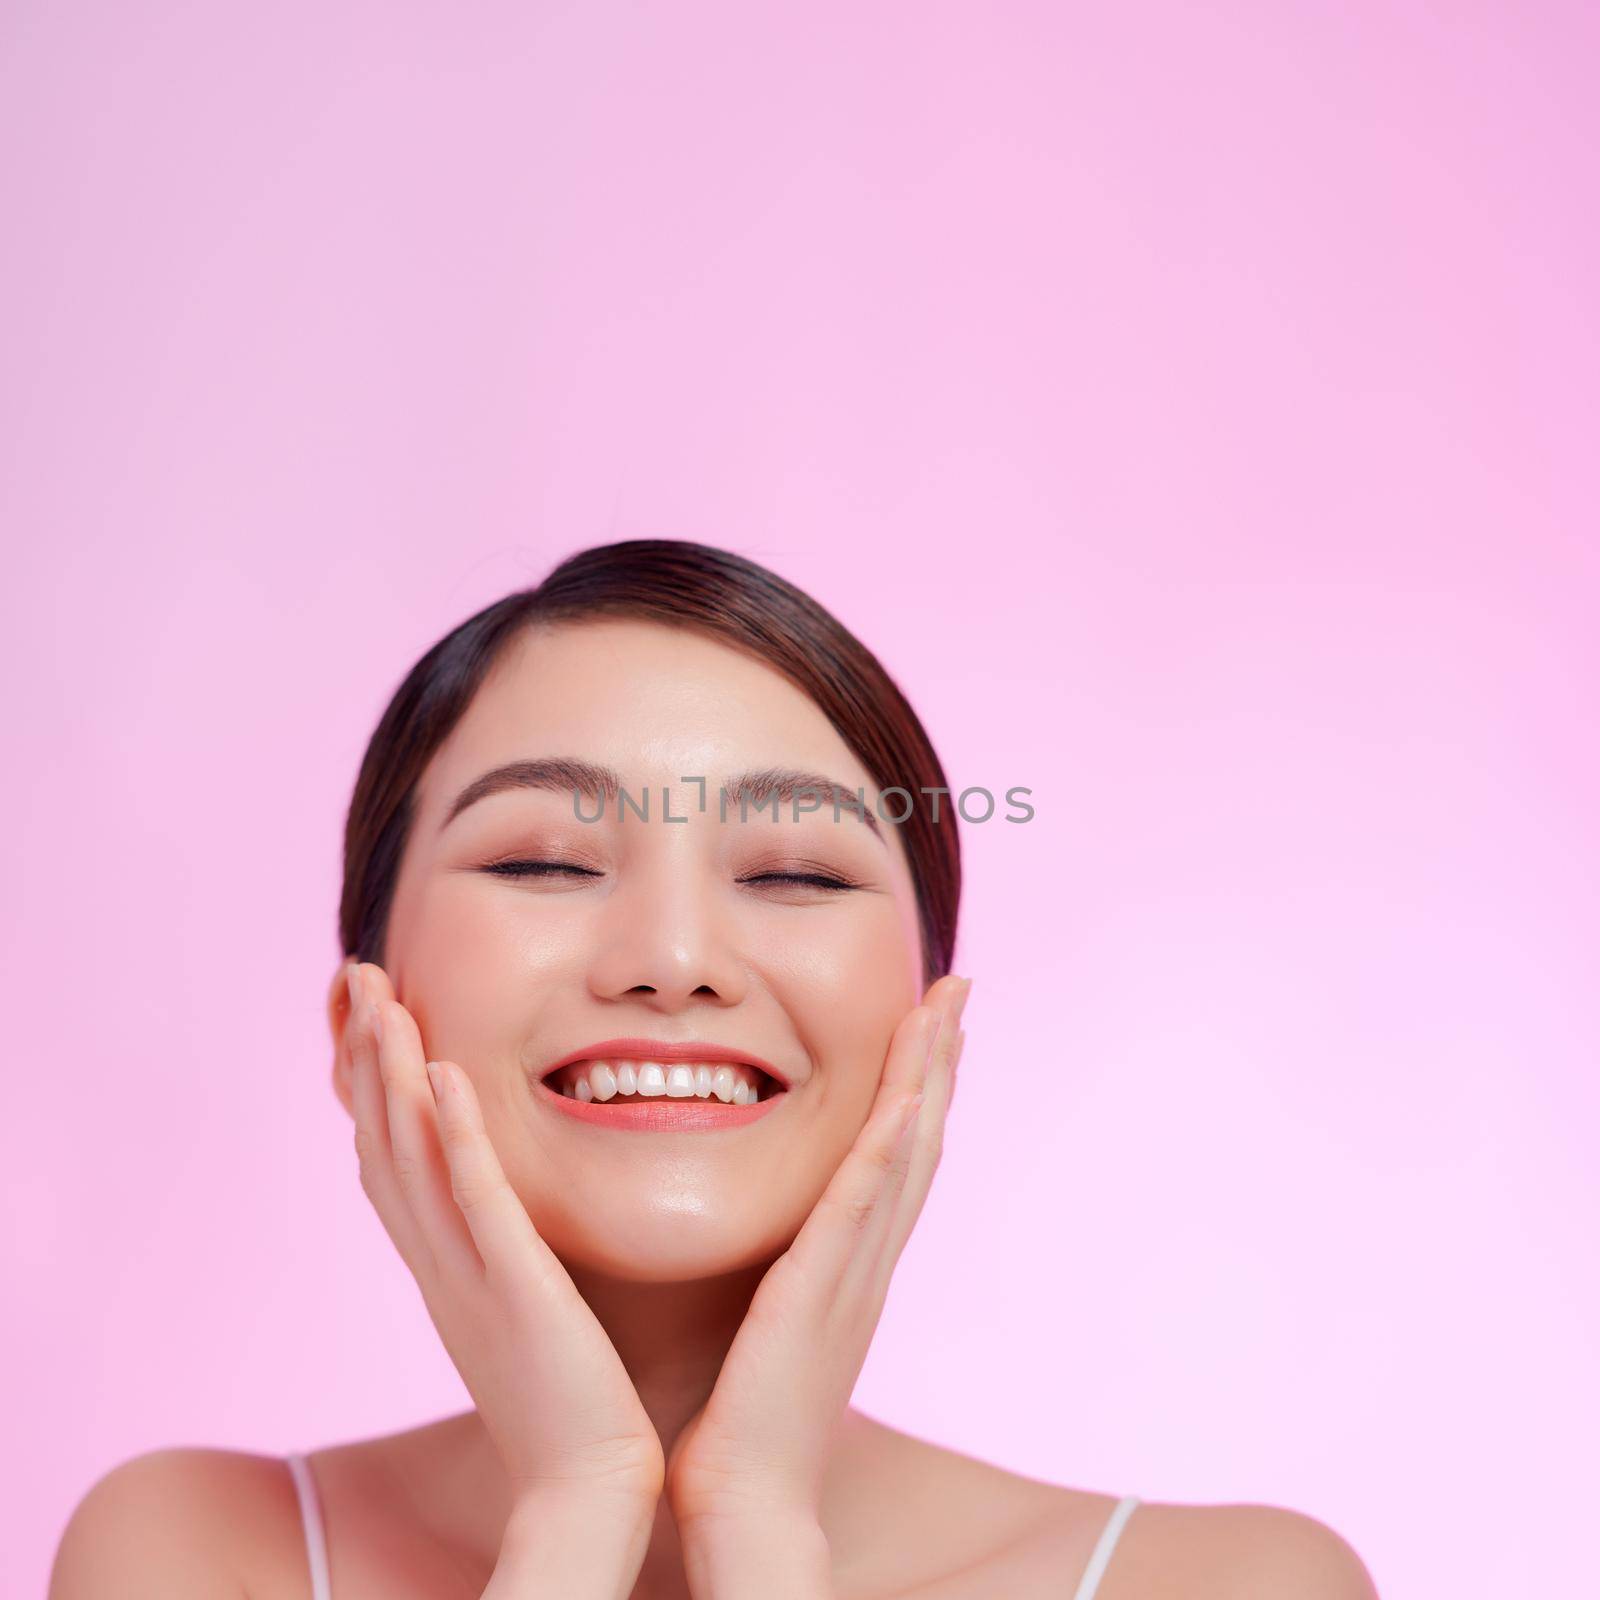 Beauty woman healthy skin concept natural makeup beautiful model girl face hands touching by makidotvn